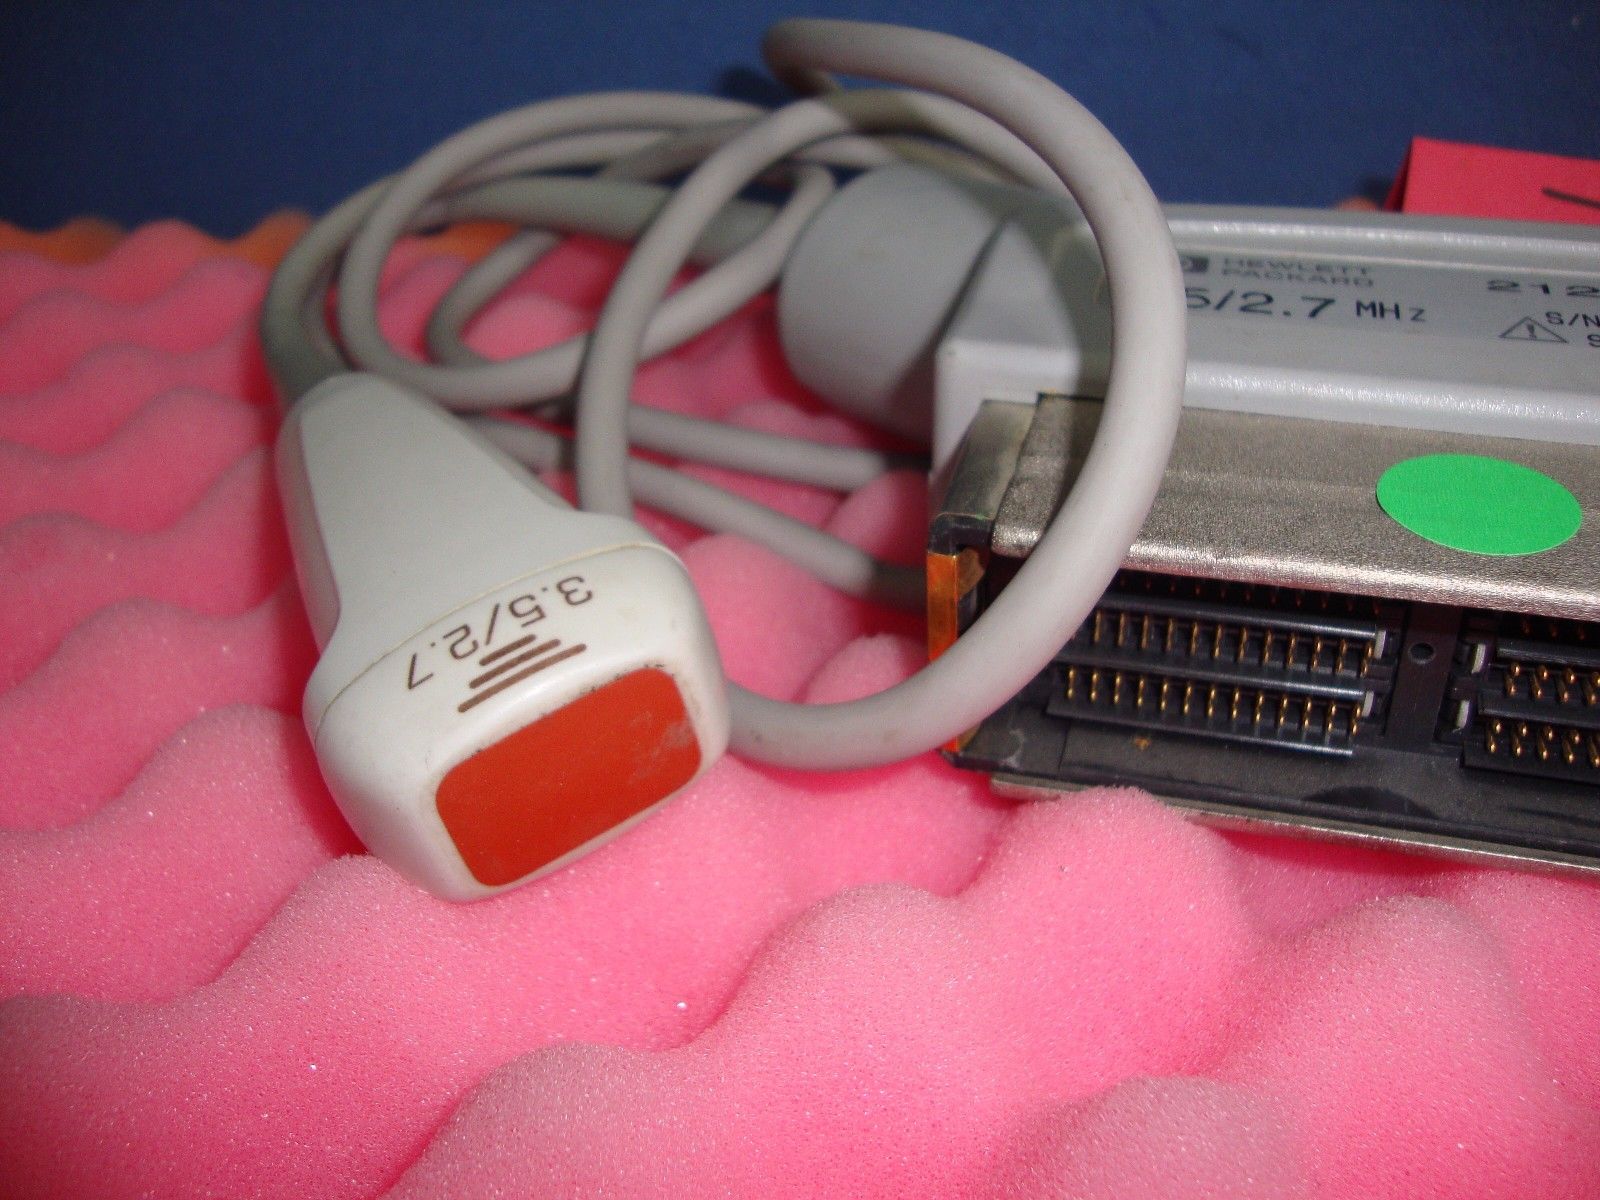 a close up of a cord connected to a device